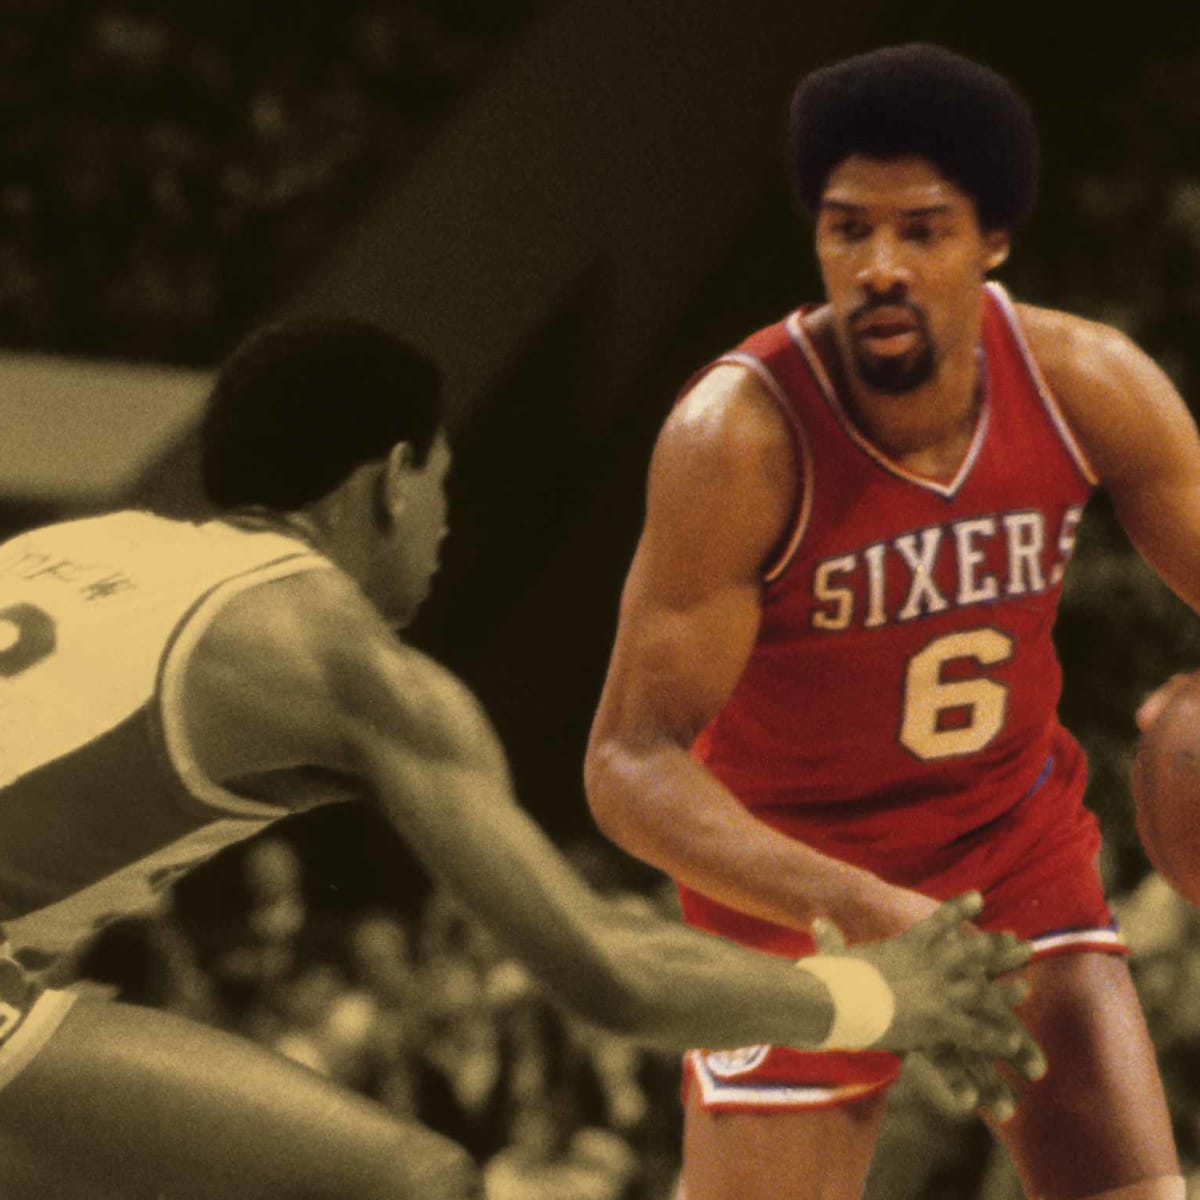 1970s basketball: More than dunks and dazzling dribbles